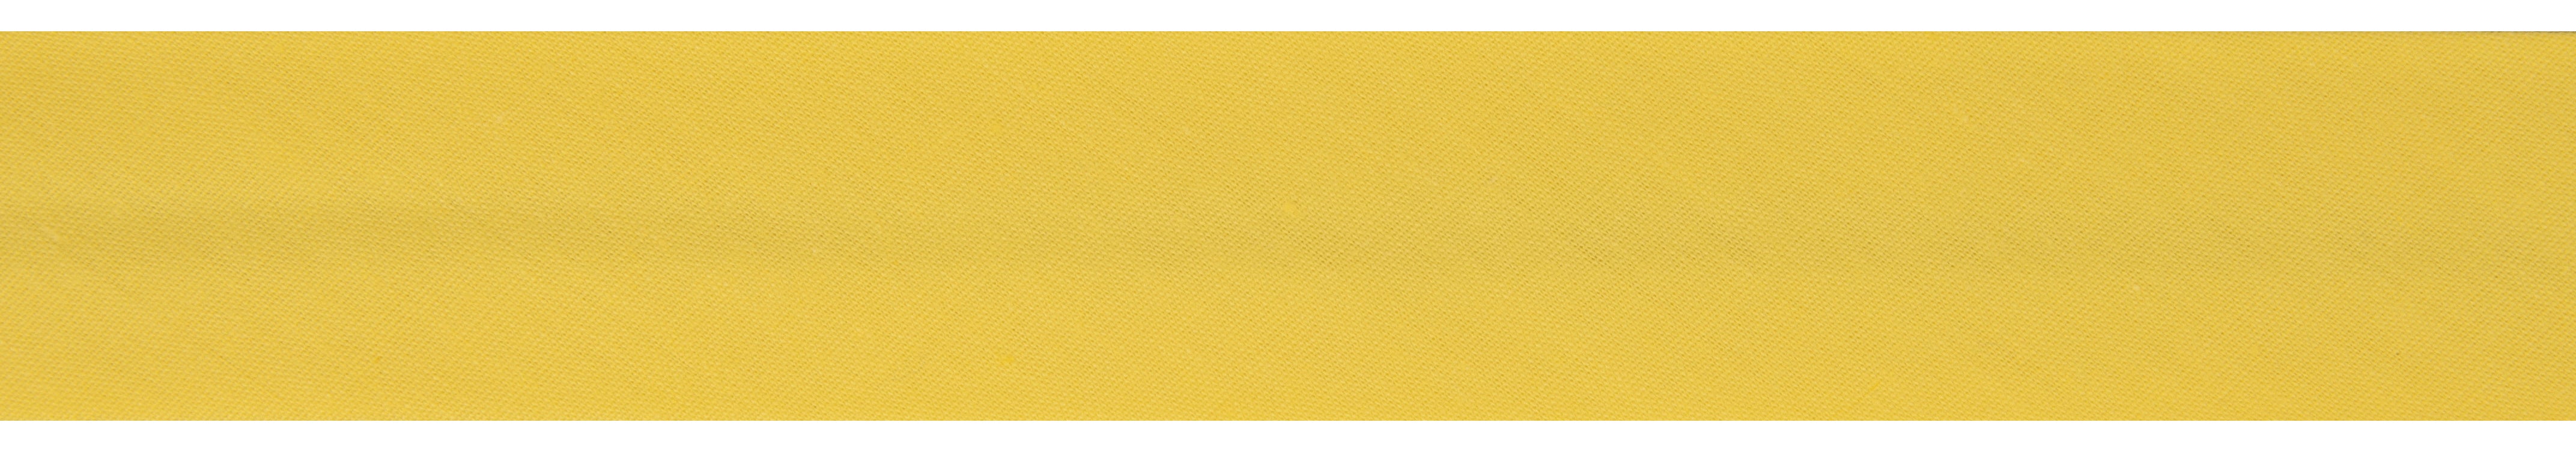 Bright Yellow Bias Binding | 25mm width from Jaycotts Sewing Supplies